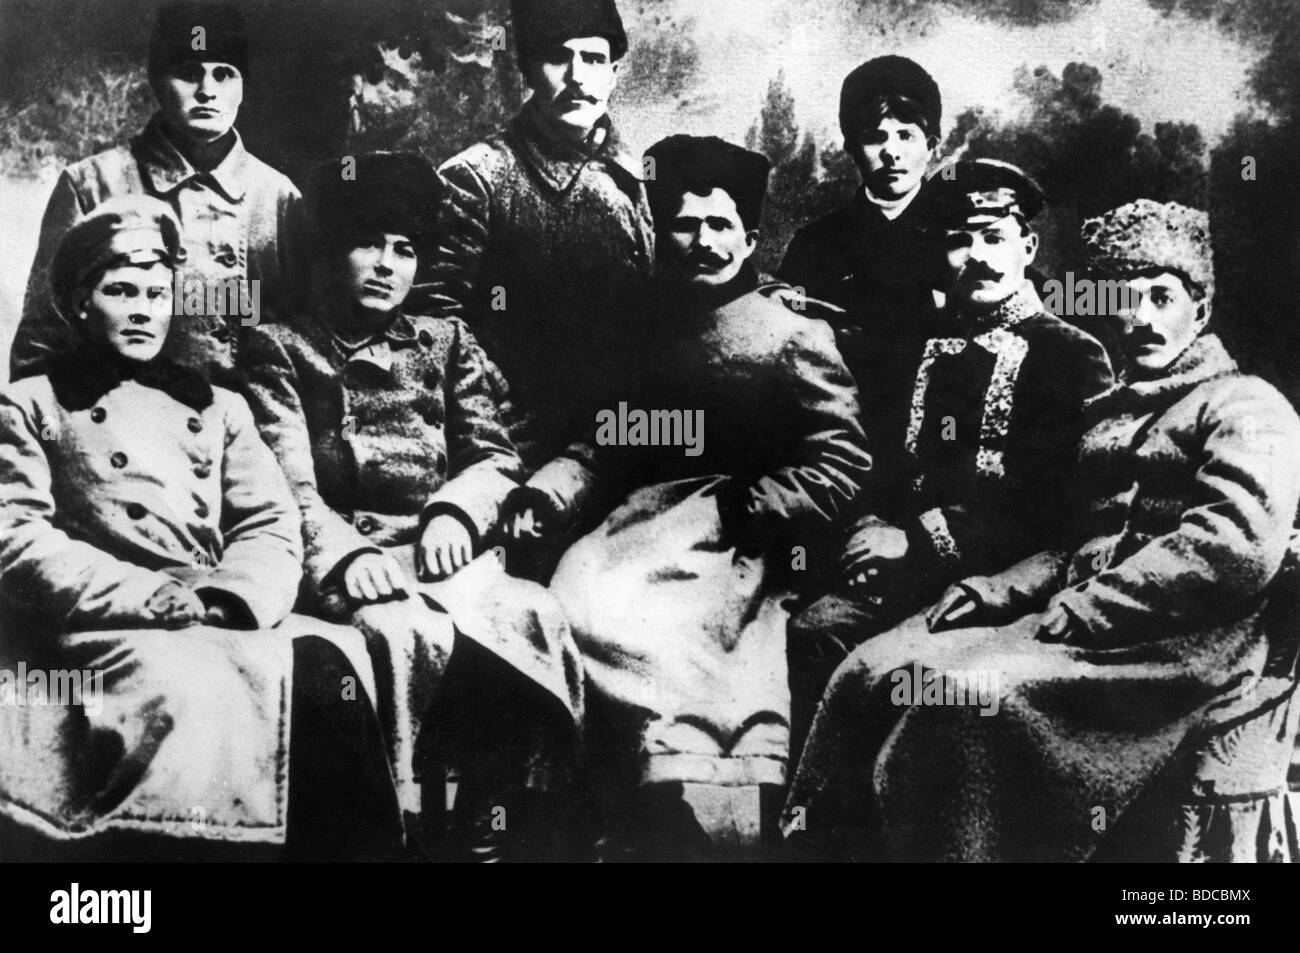 geography / travel, Russia, Civil War 1917 - 1920, Red Army military leader Vasily Chapayev and his officers, 1918, USSR, Soviet Union, communists, bolsheviks, historic, historical, 20th century, 1910s, people, Stock Photo